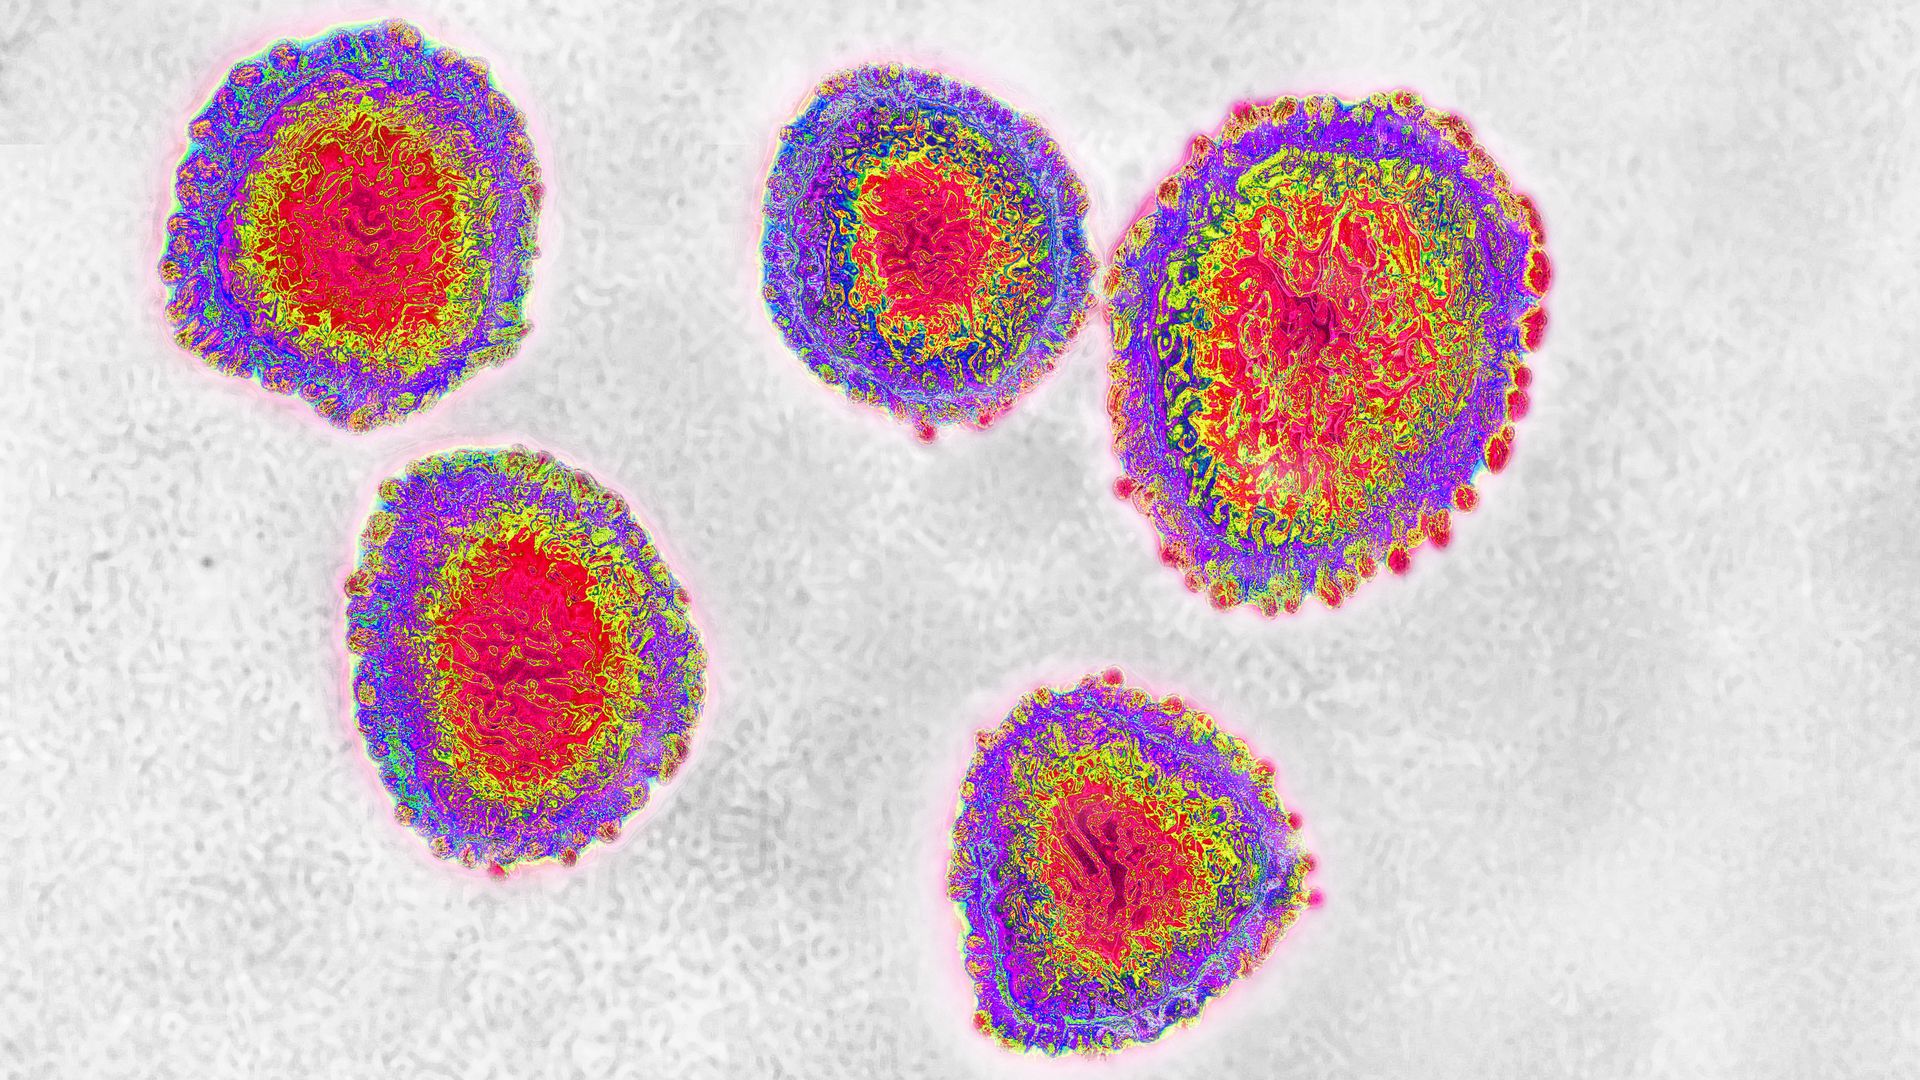 In this image, a group of cells are displayed